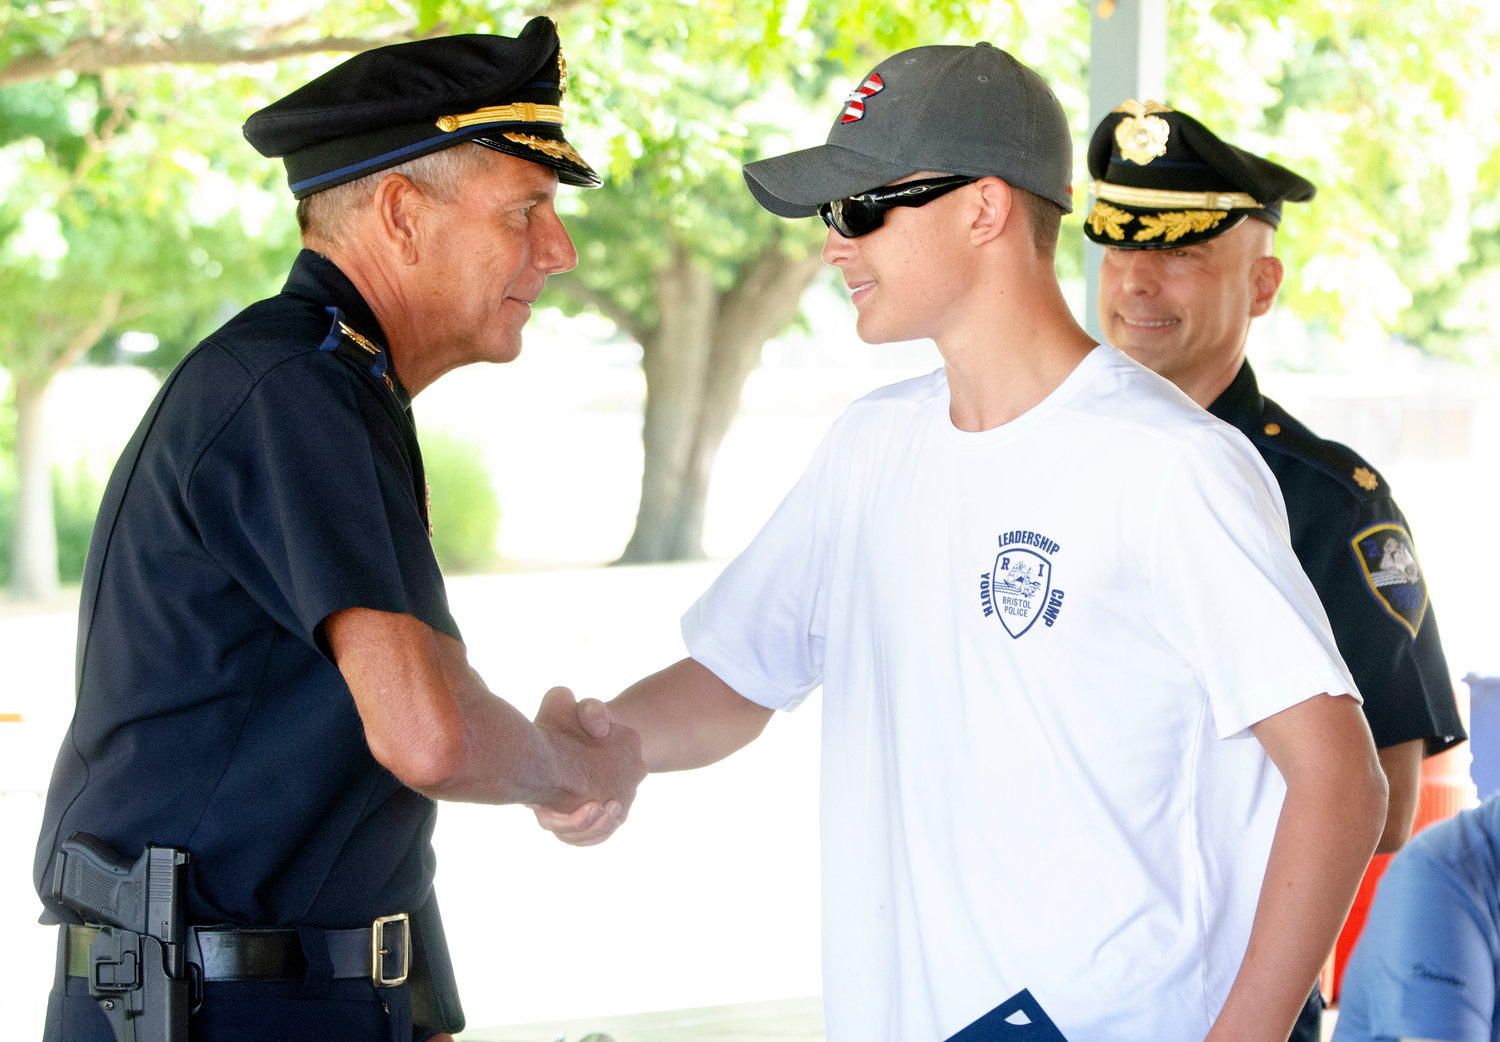 Bristol Police Chief Kevin Lynch (left) shakes hands with Robert Ennis after he gave him a certificate of appreciation at leadership academy at the town beach on Friday.